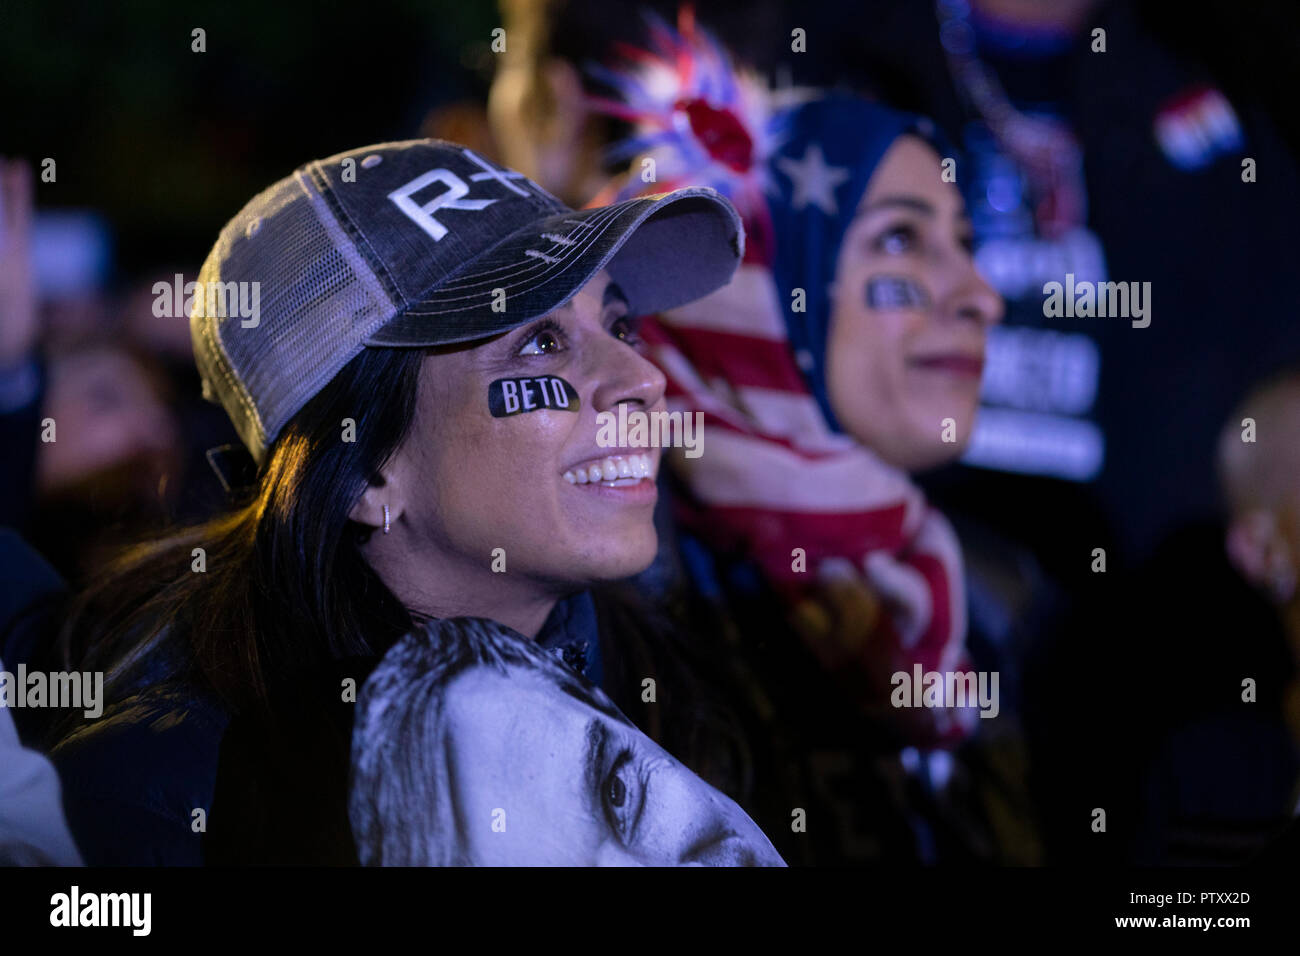 Young supporter wearing Beto eye black sticker smiles as the former congressman Beto O'Rourke of El Paso, TX kicks off his presidential campaign at a late night rally in front of the Texas Capitol. Stock Photo